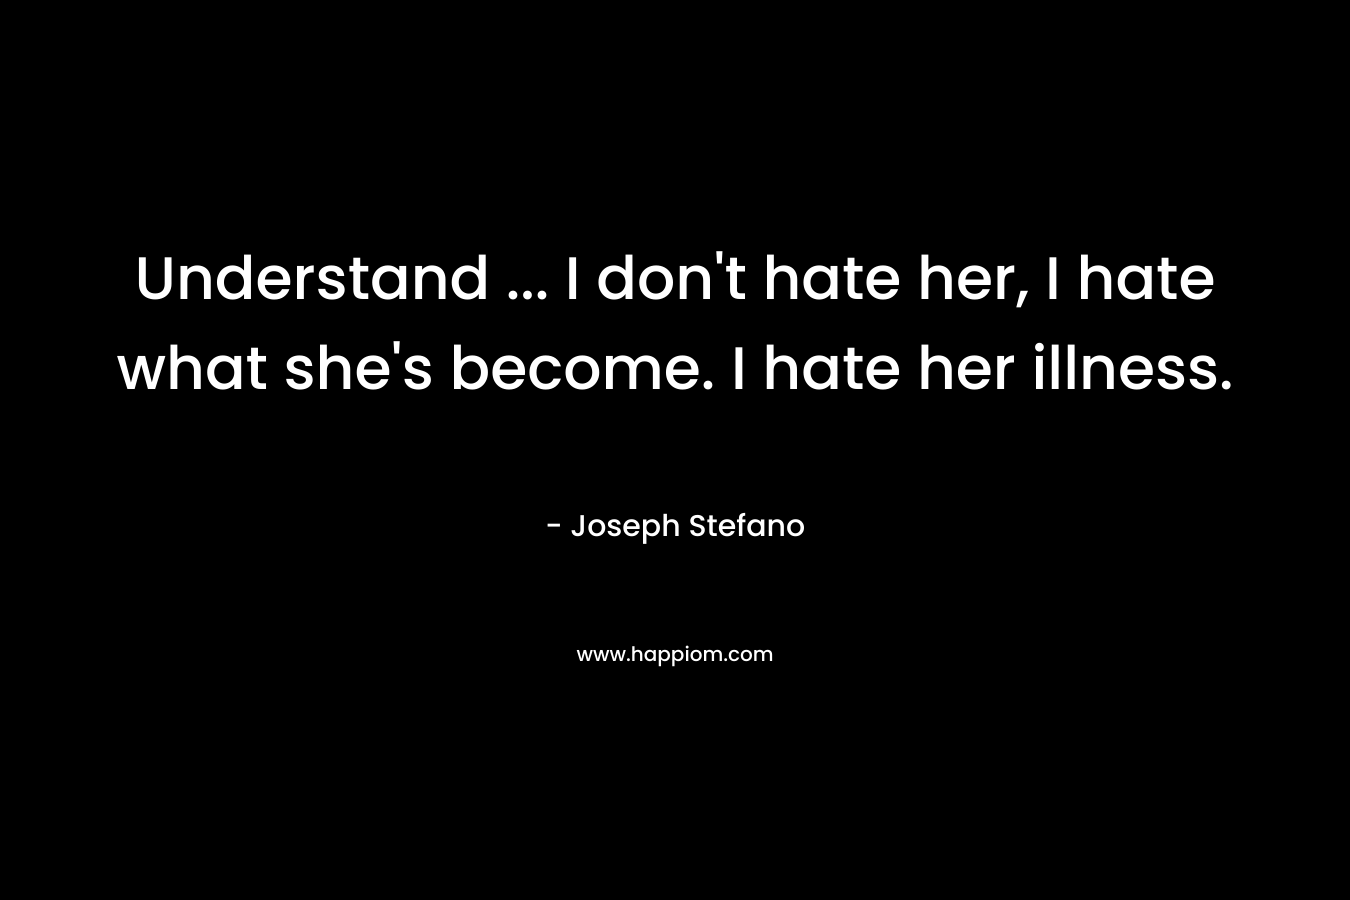 Understand ... I don't hate her, I hate what she's become. I hate her illness.